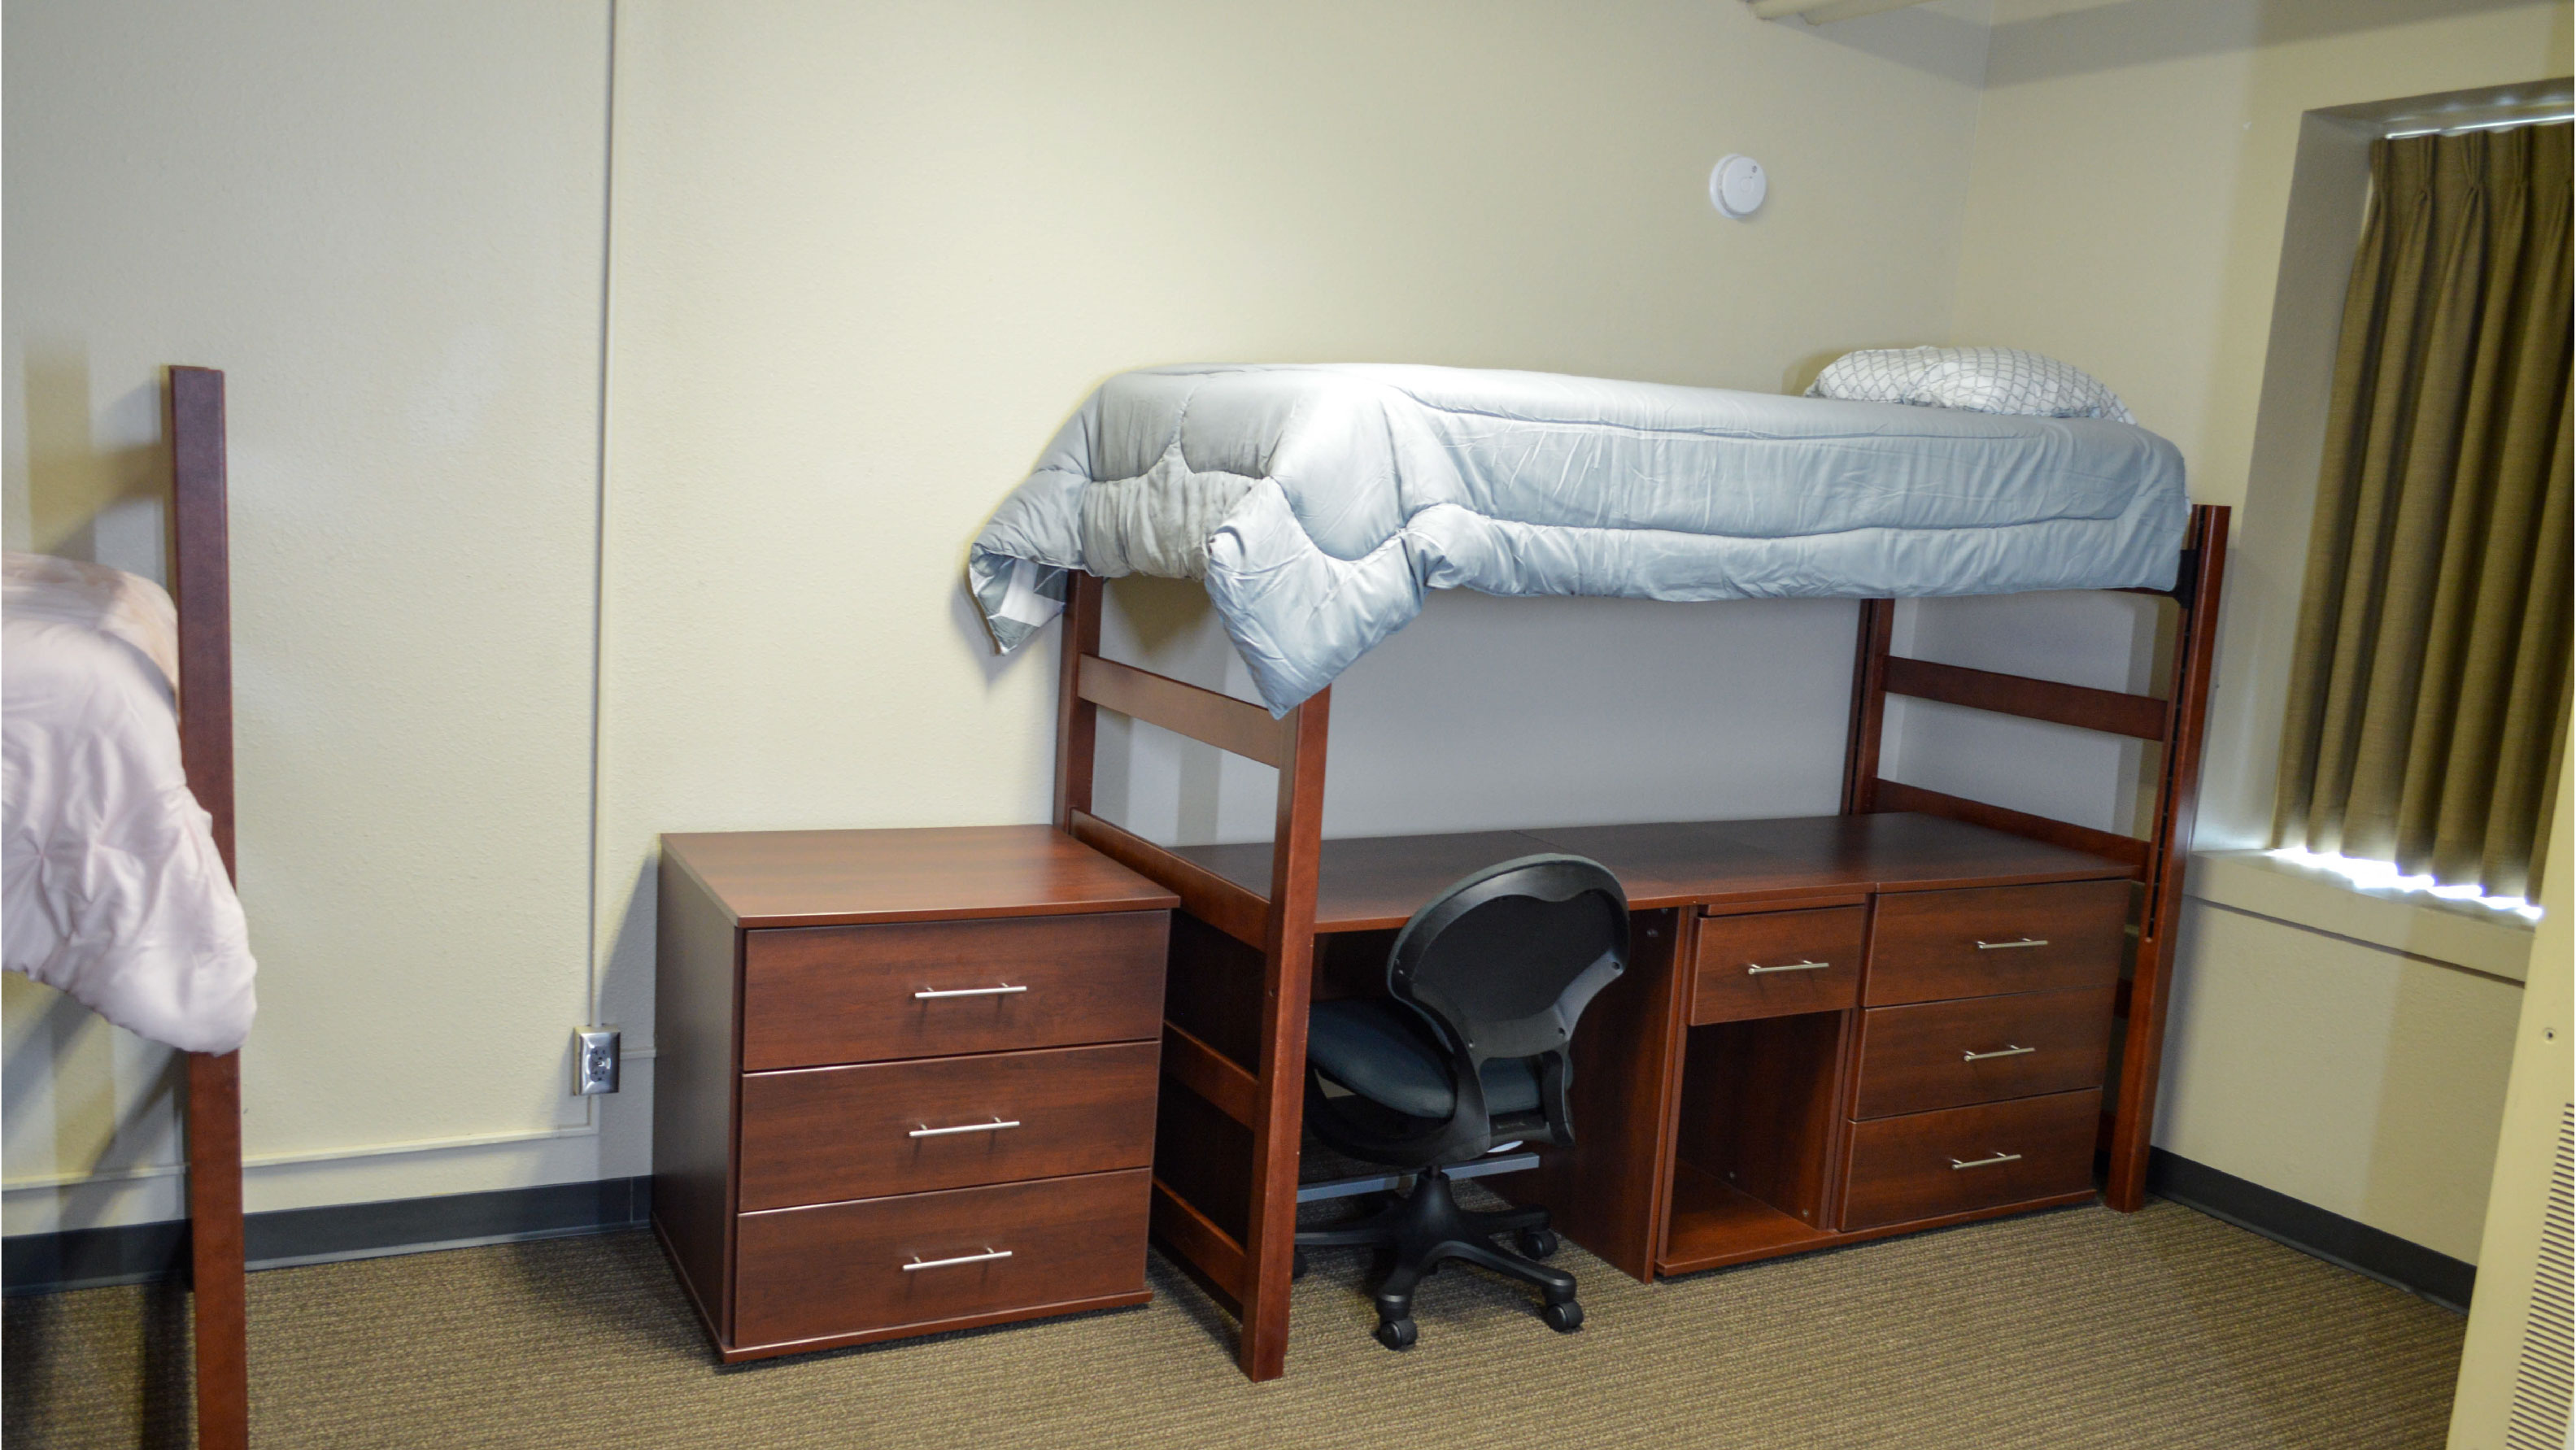 Bedroom with lofted bed desk and set of drawers